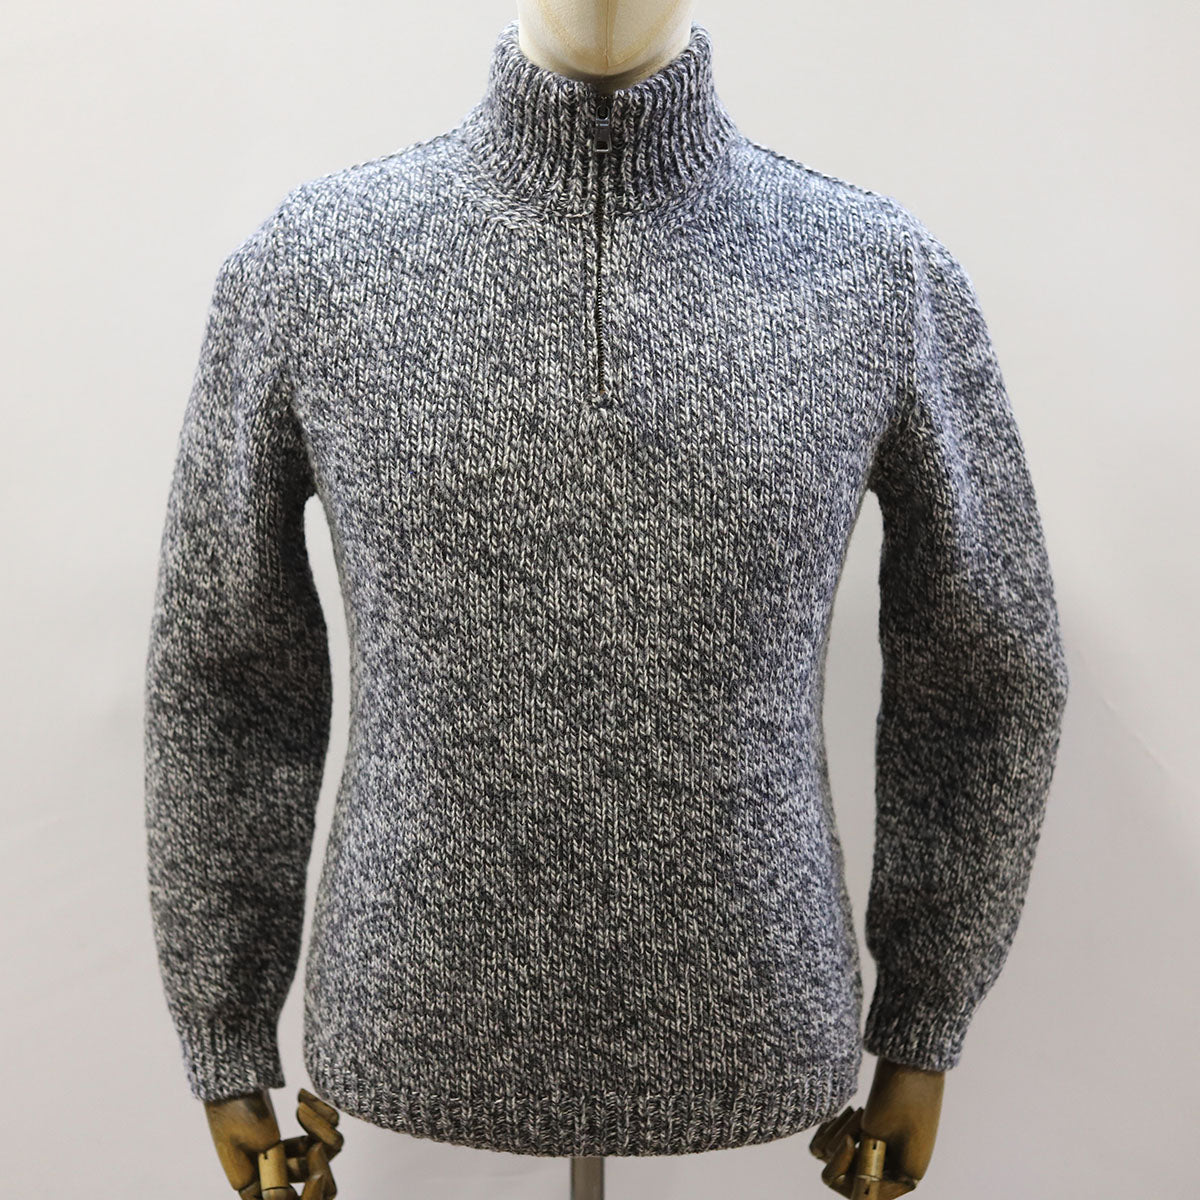 Fisherman Out Of Ireland Half Zip Sweater - Salt and Pepper